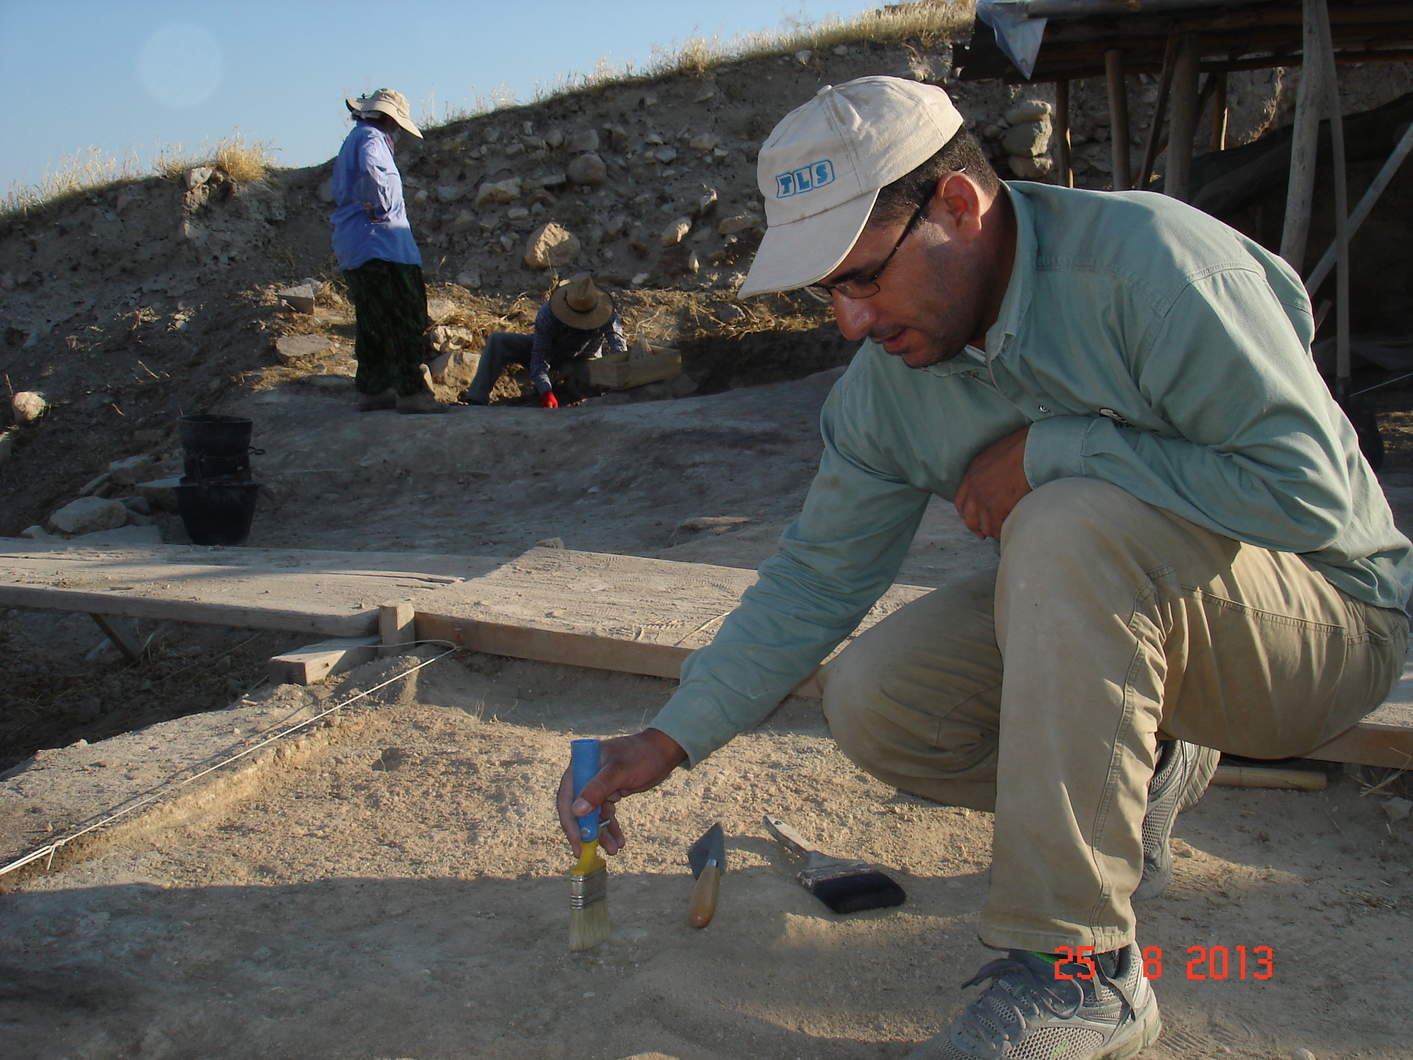 Since beginning his archaeological studies at Mu’tah University, Zakariya has participated in numerous excavations throughout Jordan, the broader Middle East, and Europe. He is shown here excavating a square at the ancient site of Arslan Tepe in eastern Turkey. Photo courtesy Zakariya Na’imat.